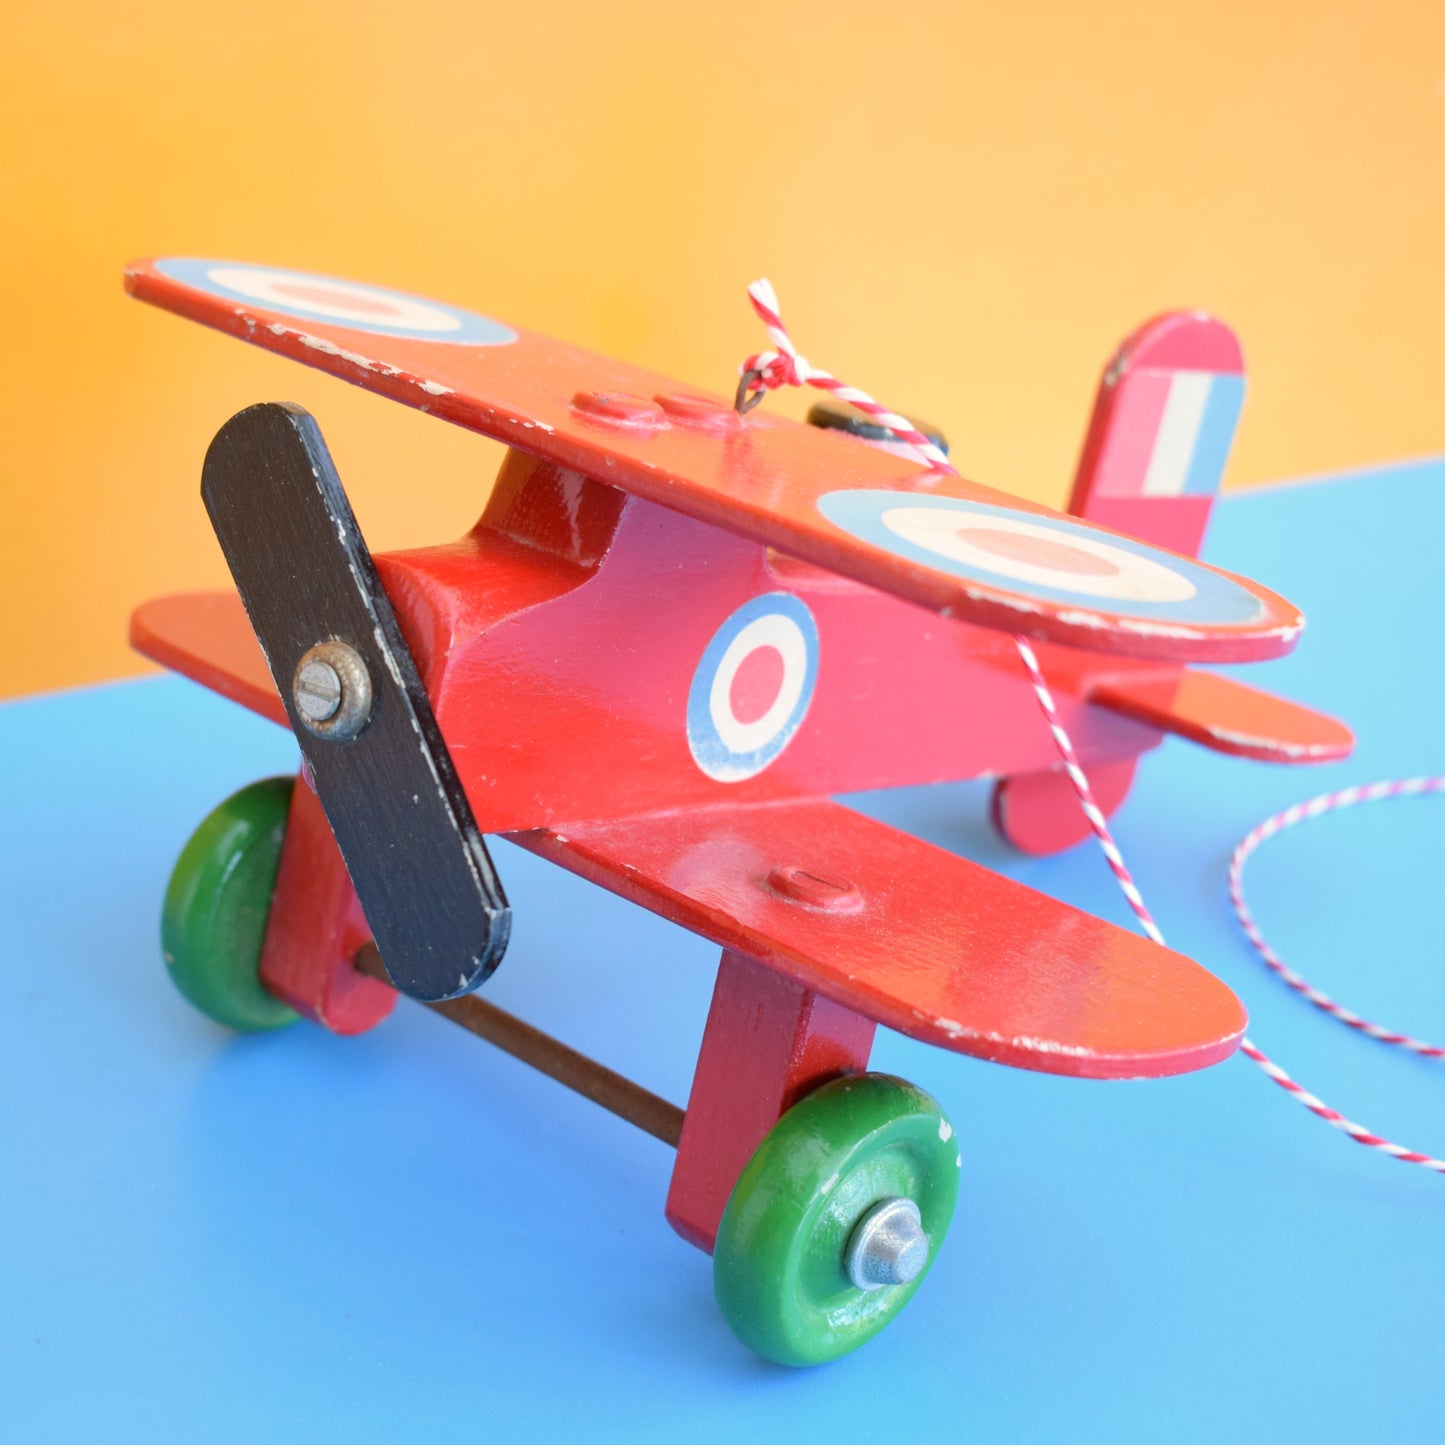 Vintage 1980s Hanging Wooden Plane Toy - Red Baron